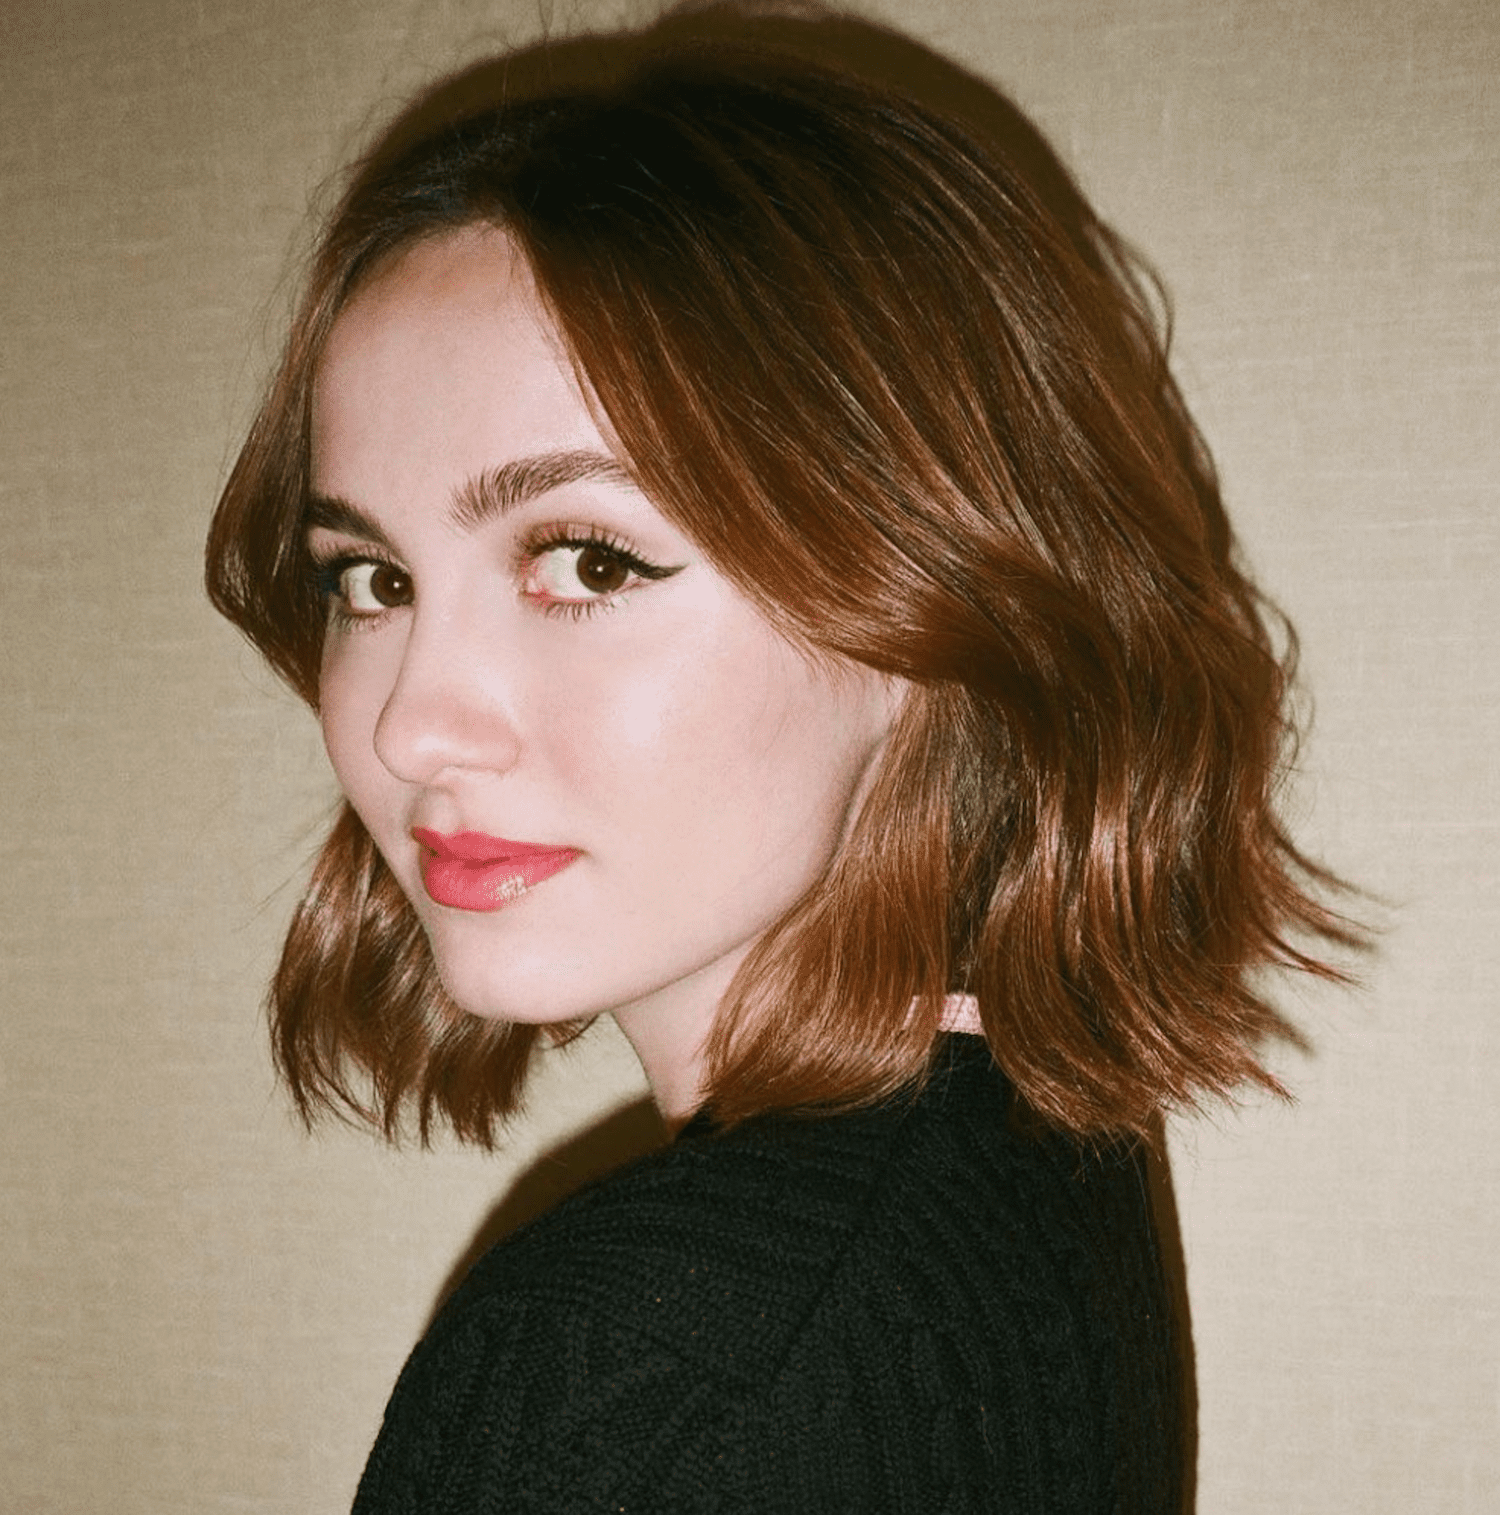 Maude Apatow looks over her shoulder with a tousled copper colored bob